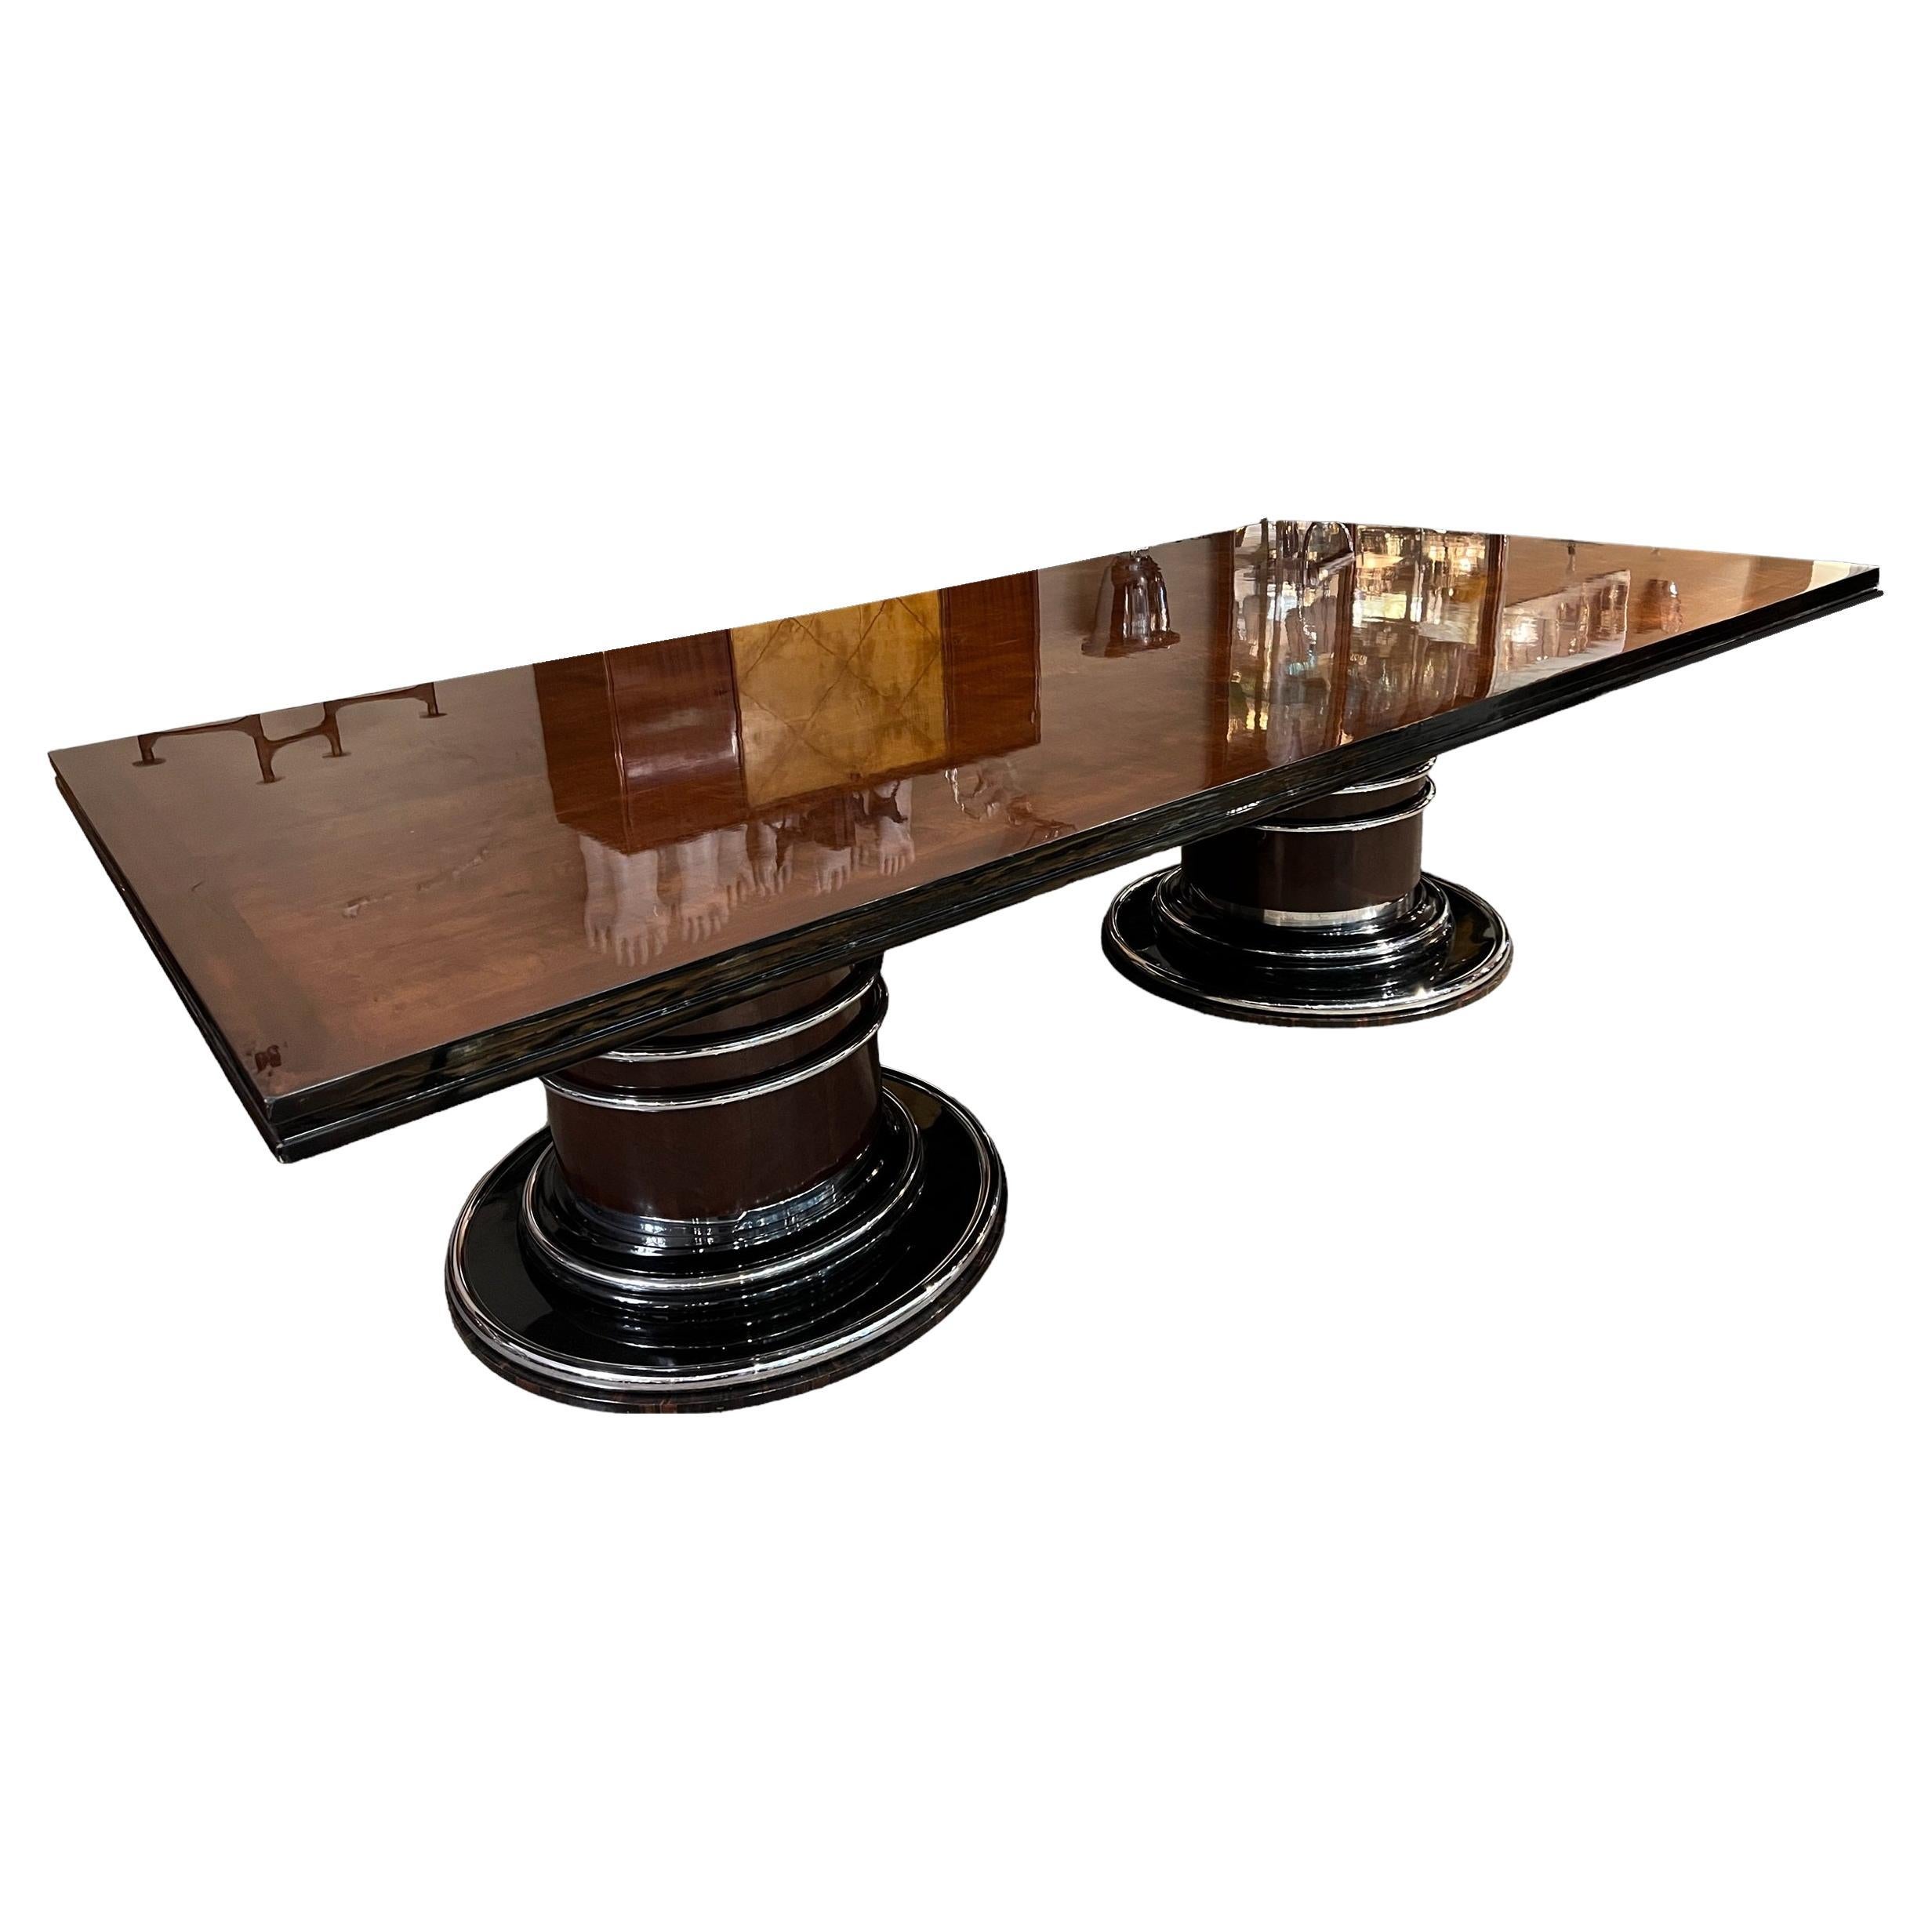 Amaizing Art Deco Table, '12 Persons', 1920, France in Chrome Steel and Wood For Sale